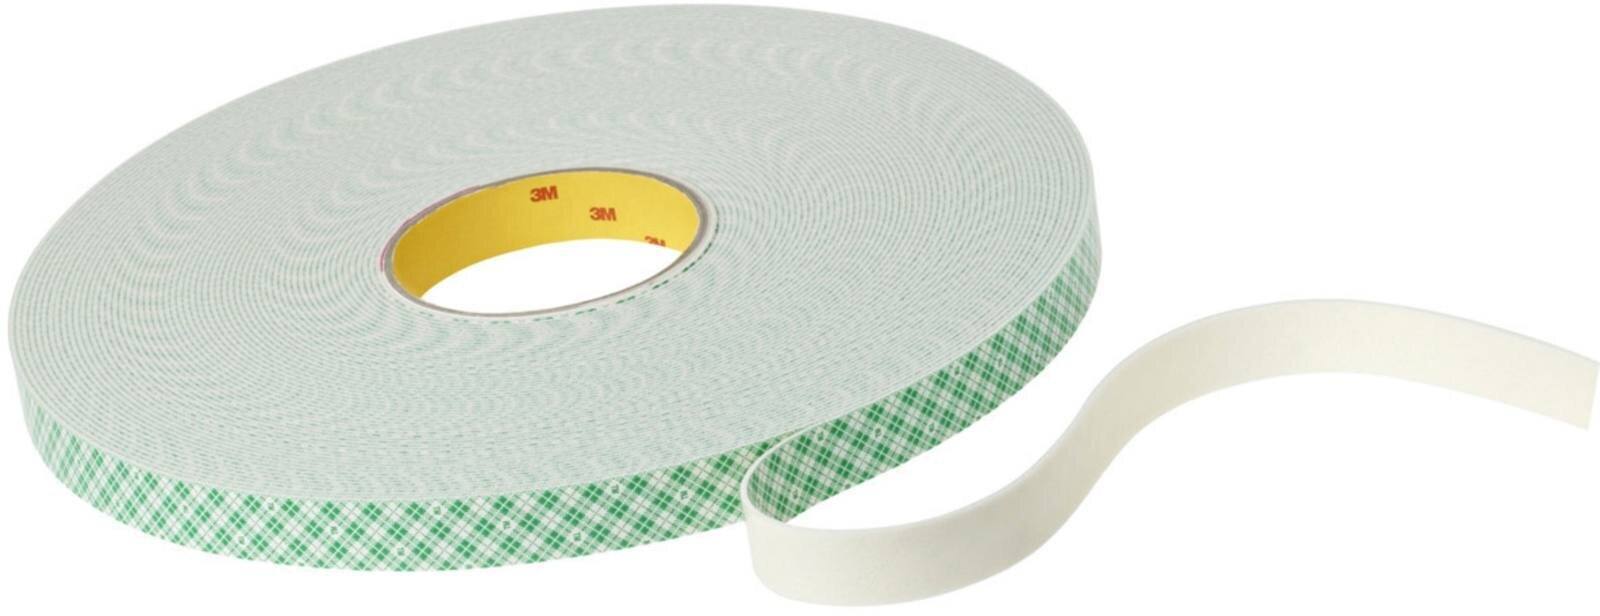 3M PU foam adhesive tape with acrylic adhesive 4026, beige, 12 mm x 33 m, 1.6 mm